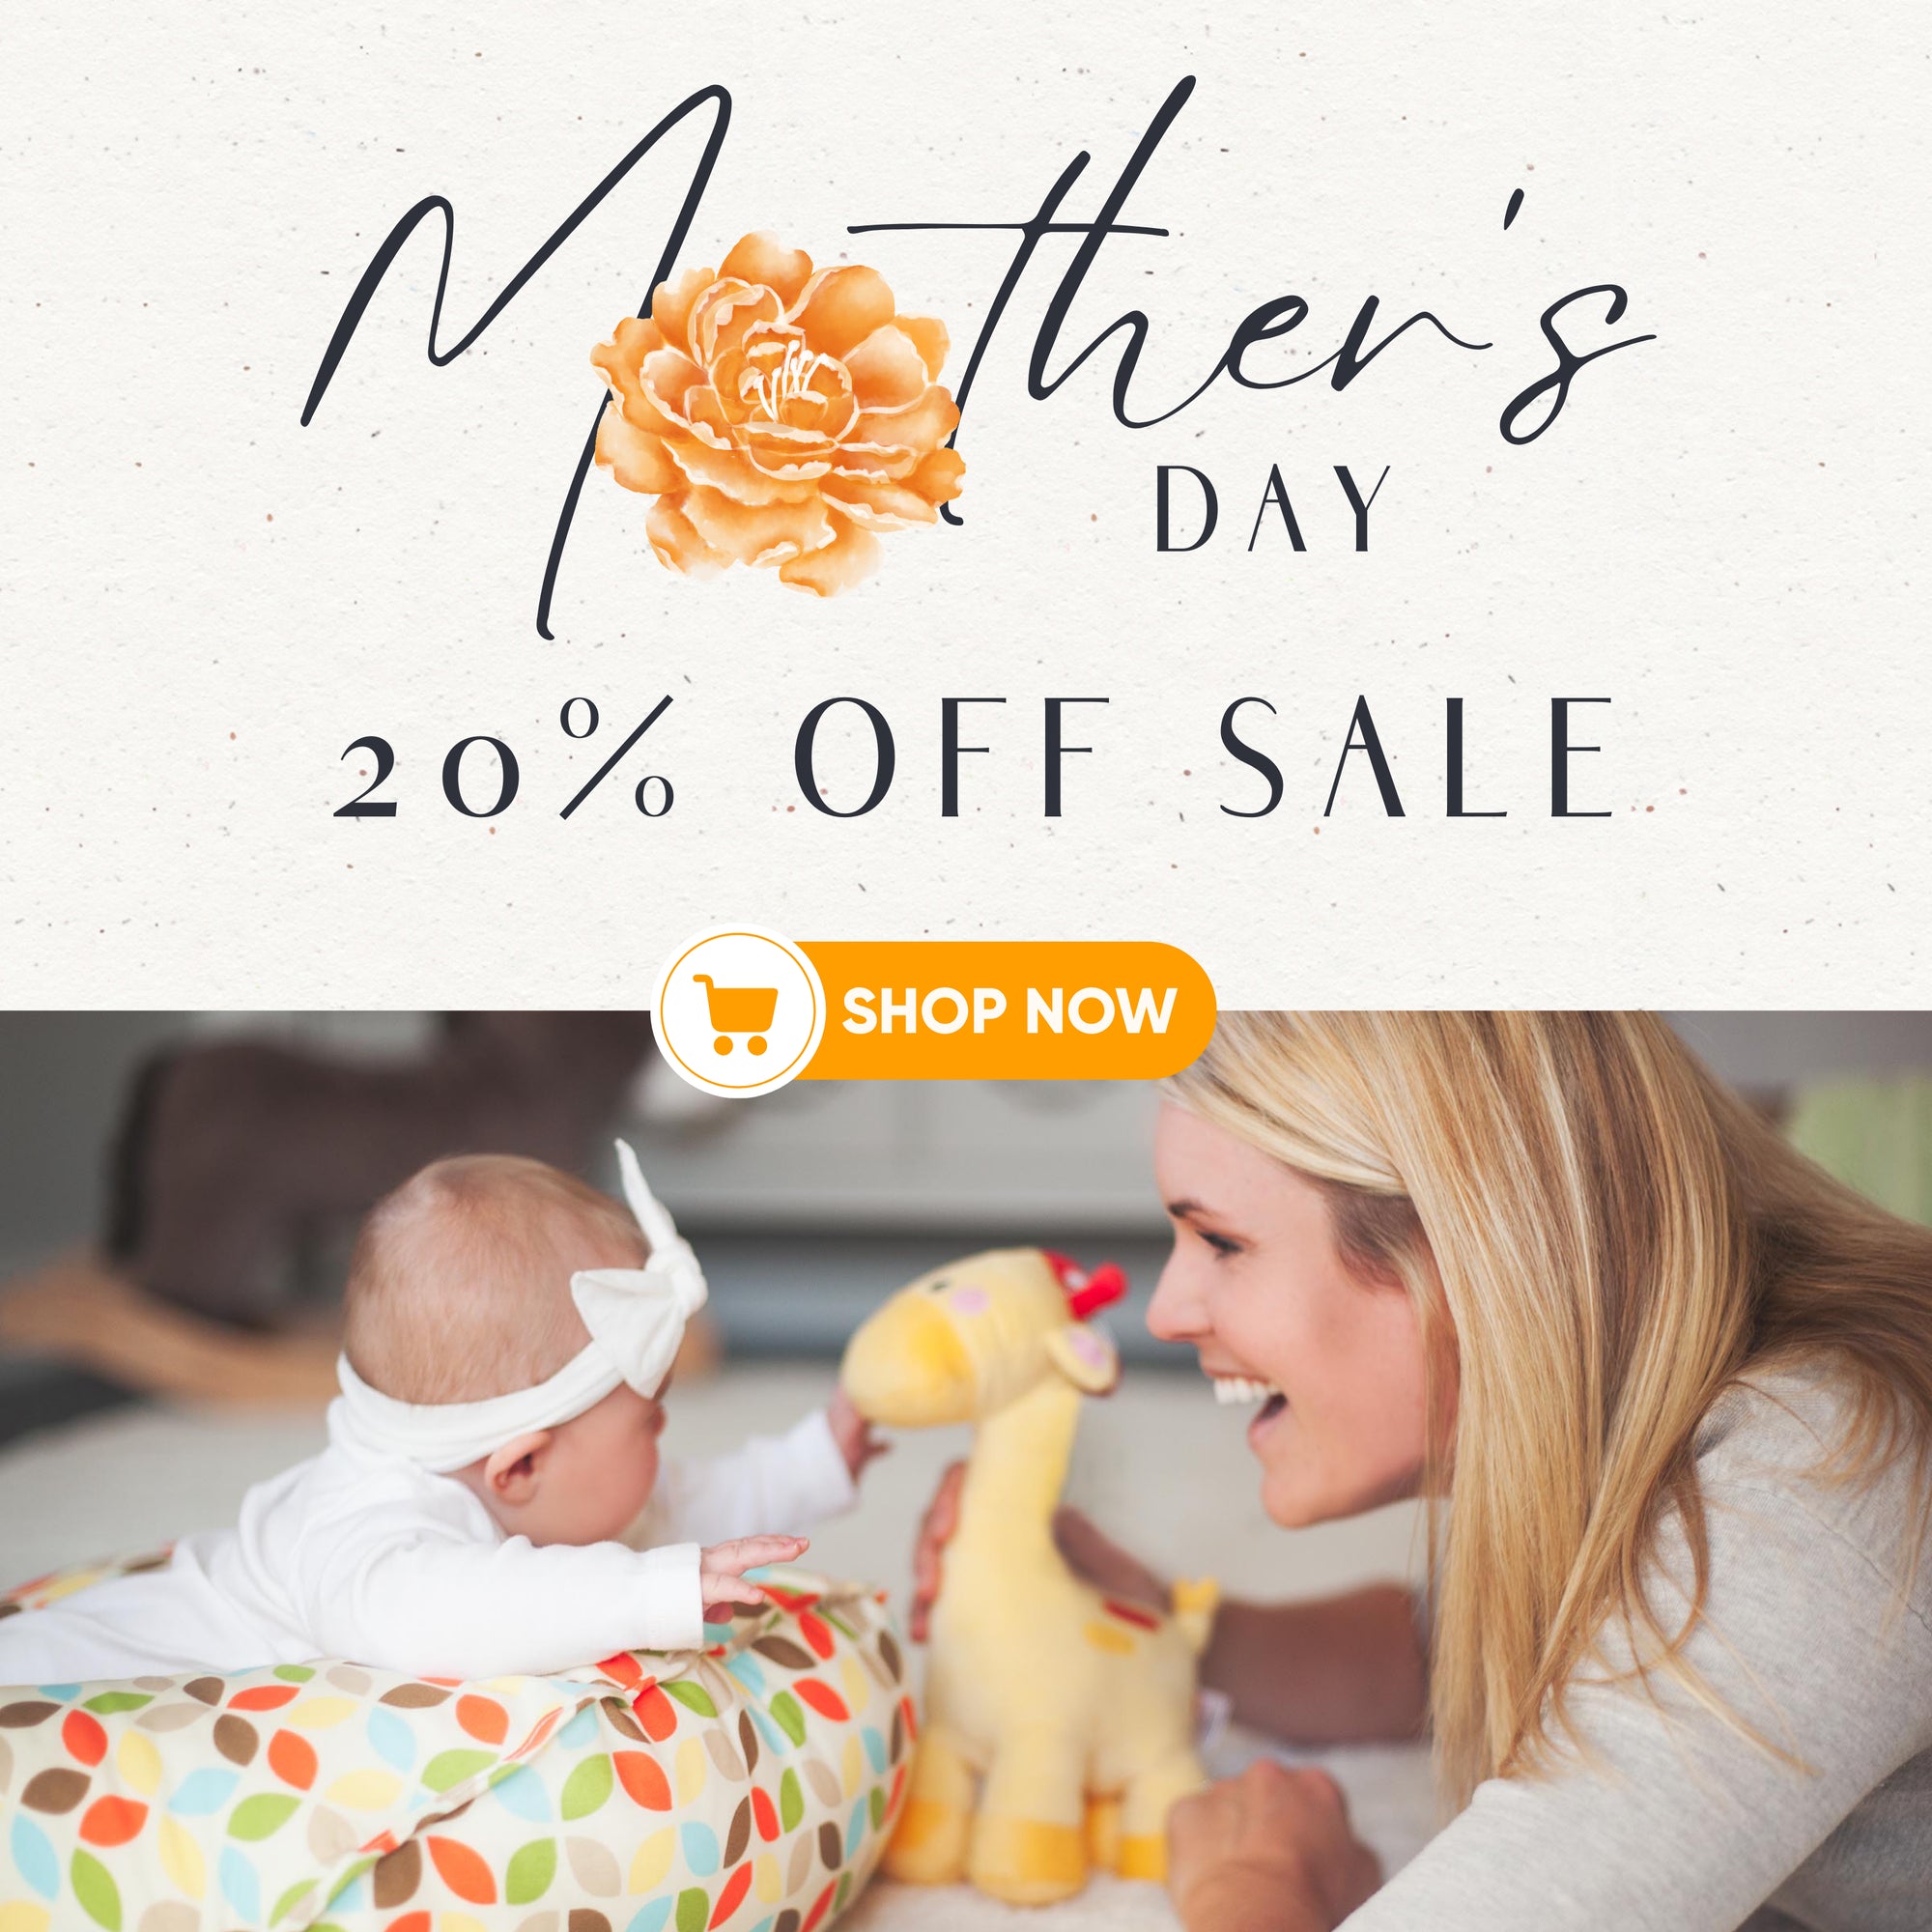 Mother's Day 20% Off Sale Shop Now with Baby on Cuddle-U and mom on floor